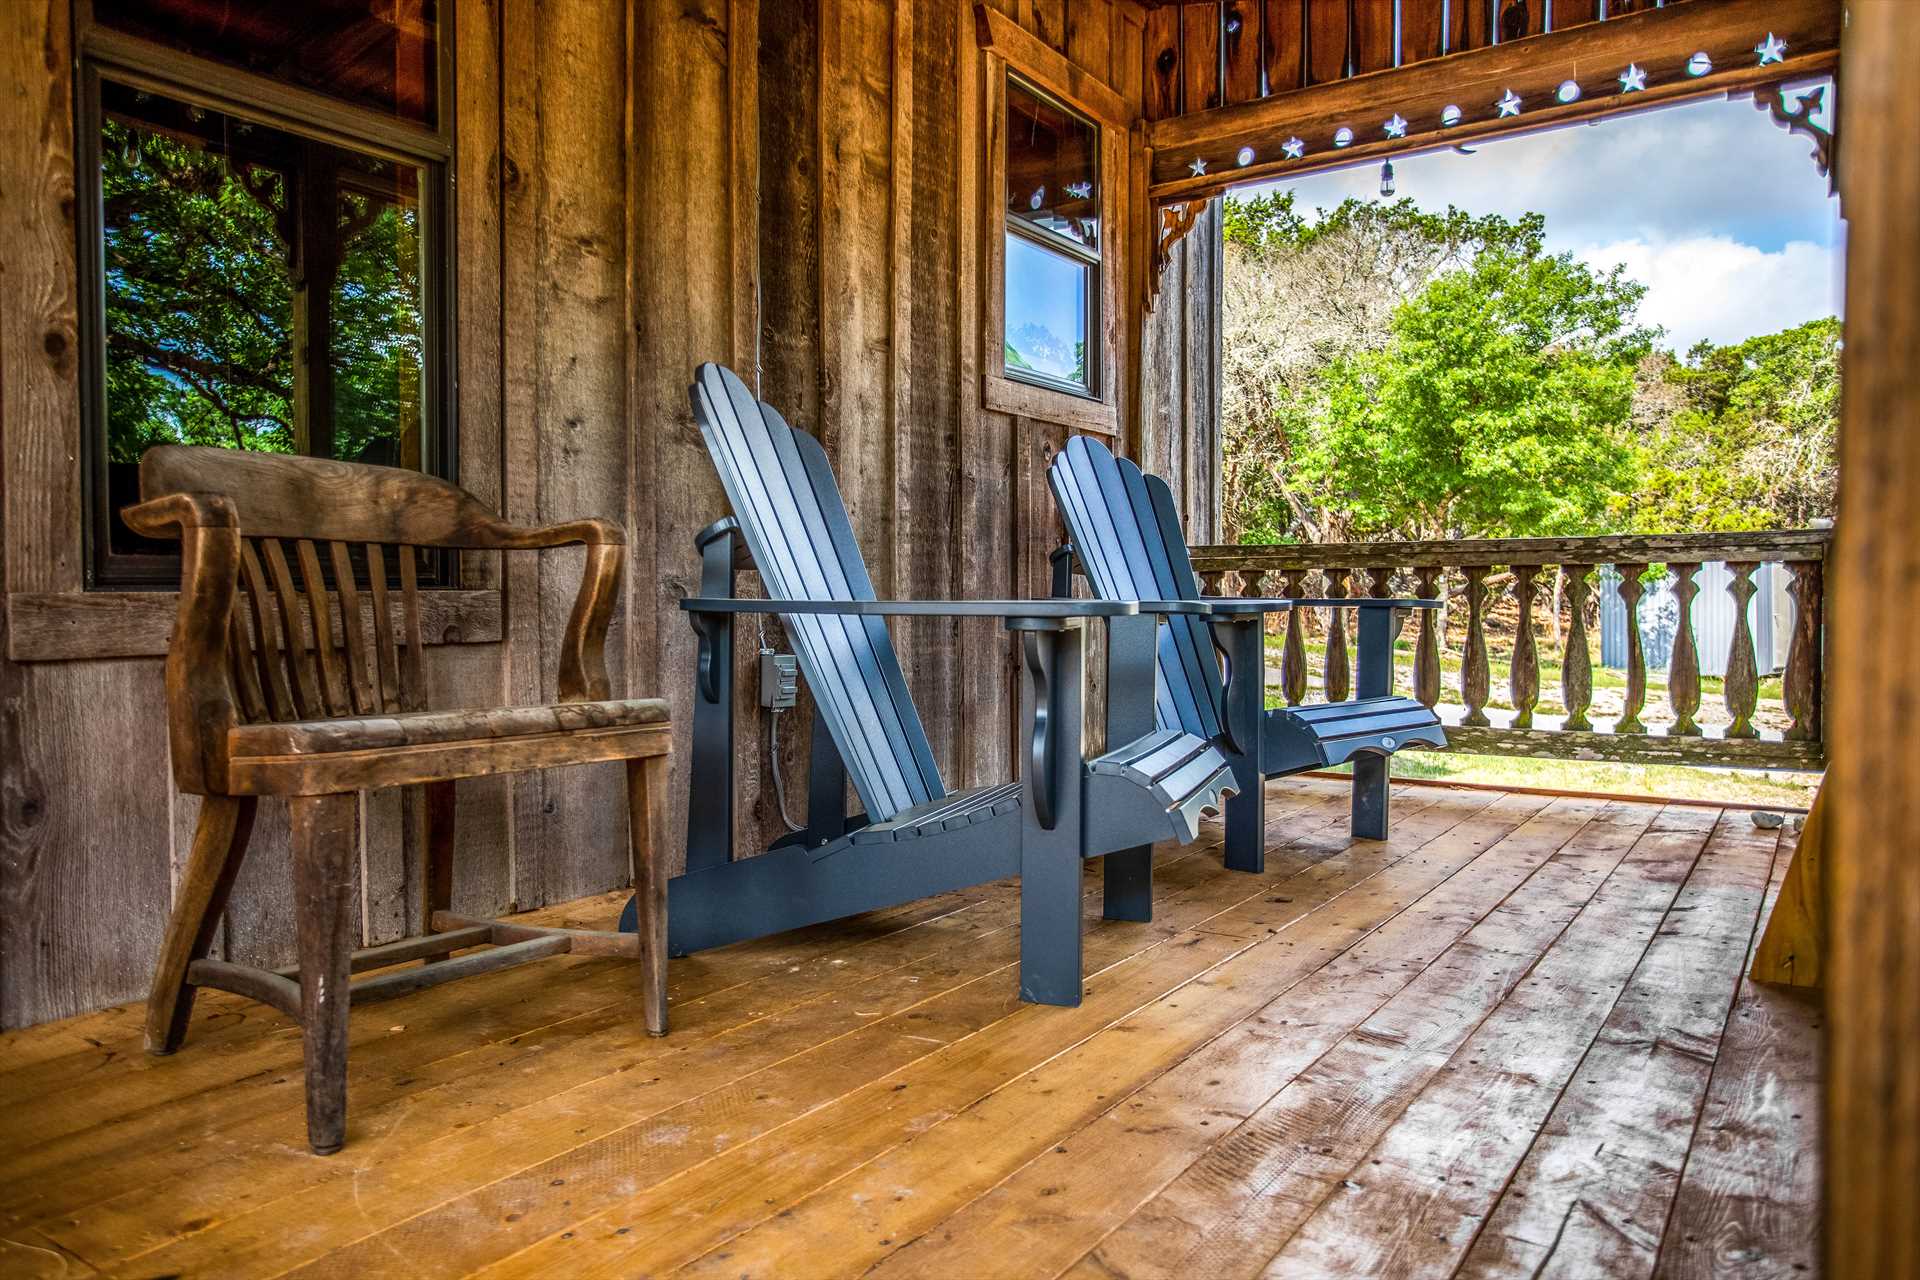                                                 Our guests love the shaded porch! While you're relaxing here, take a good look at the decorative star-and-globe filagreed woodwork.